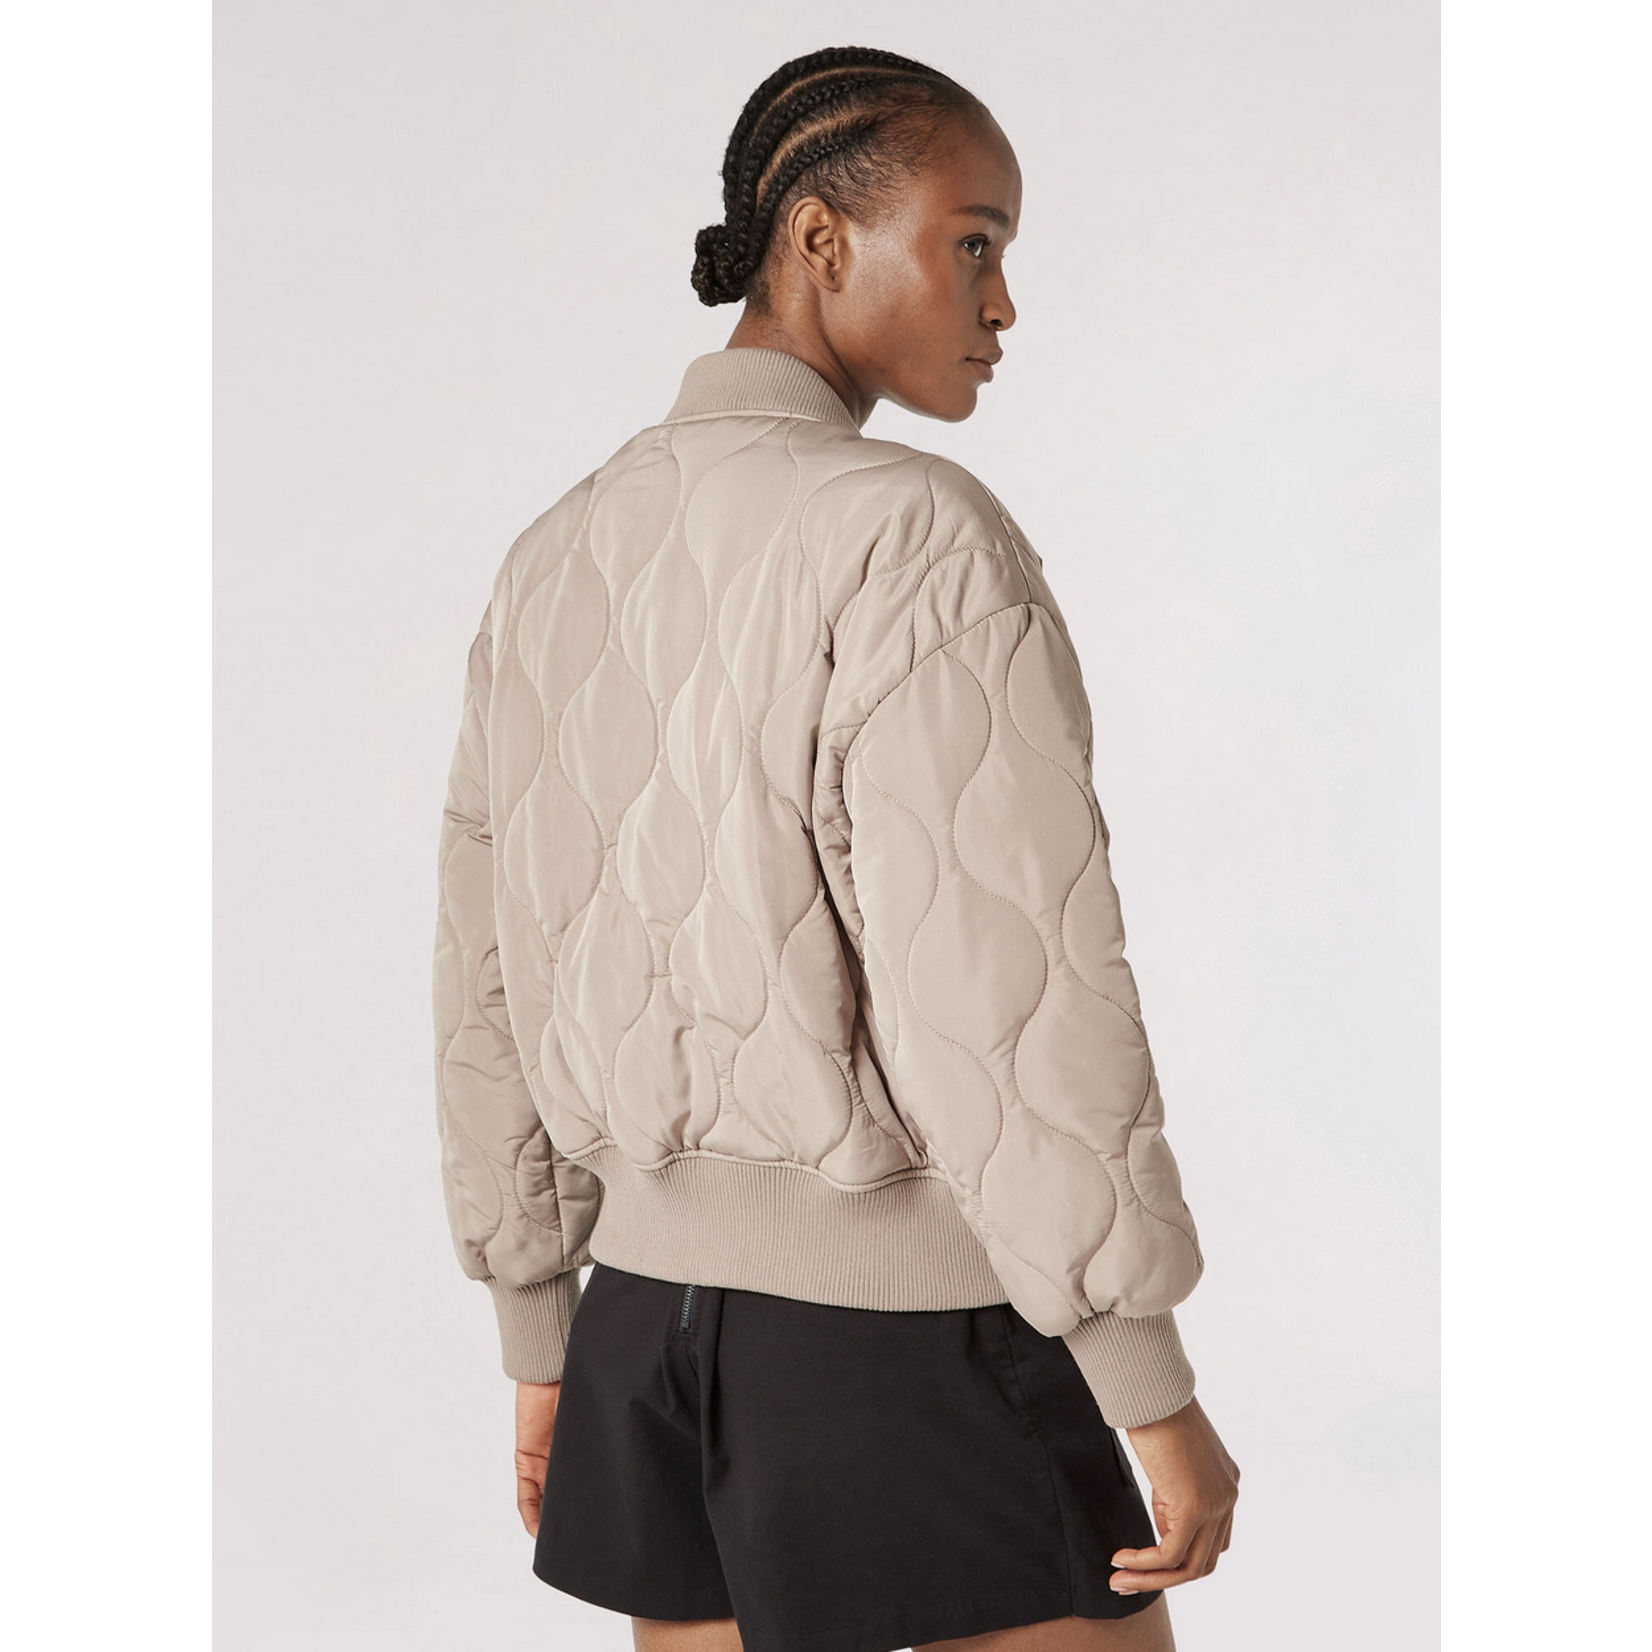 Apricot Phoenix Quilted Bomber